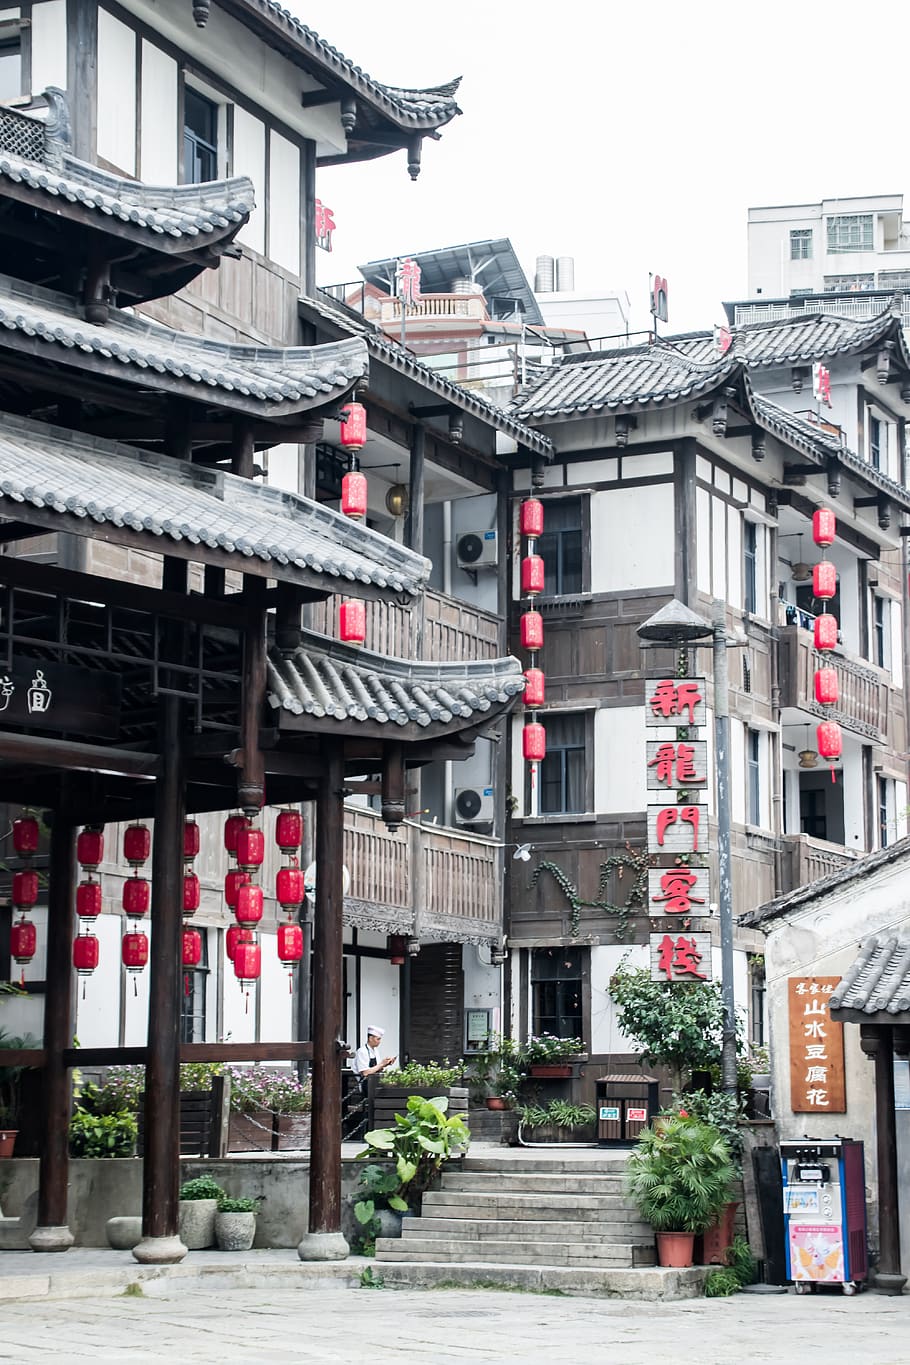 summer, small town, cyberpunk, small fresh, ins wind, small chengdu, han culture, antique architecture, japanese, city